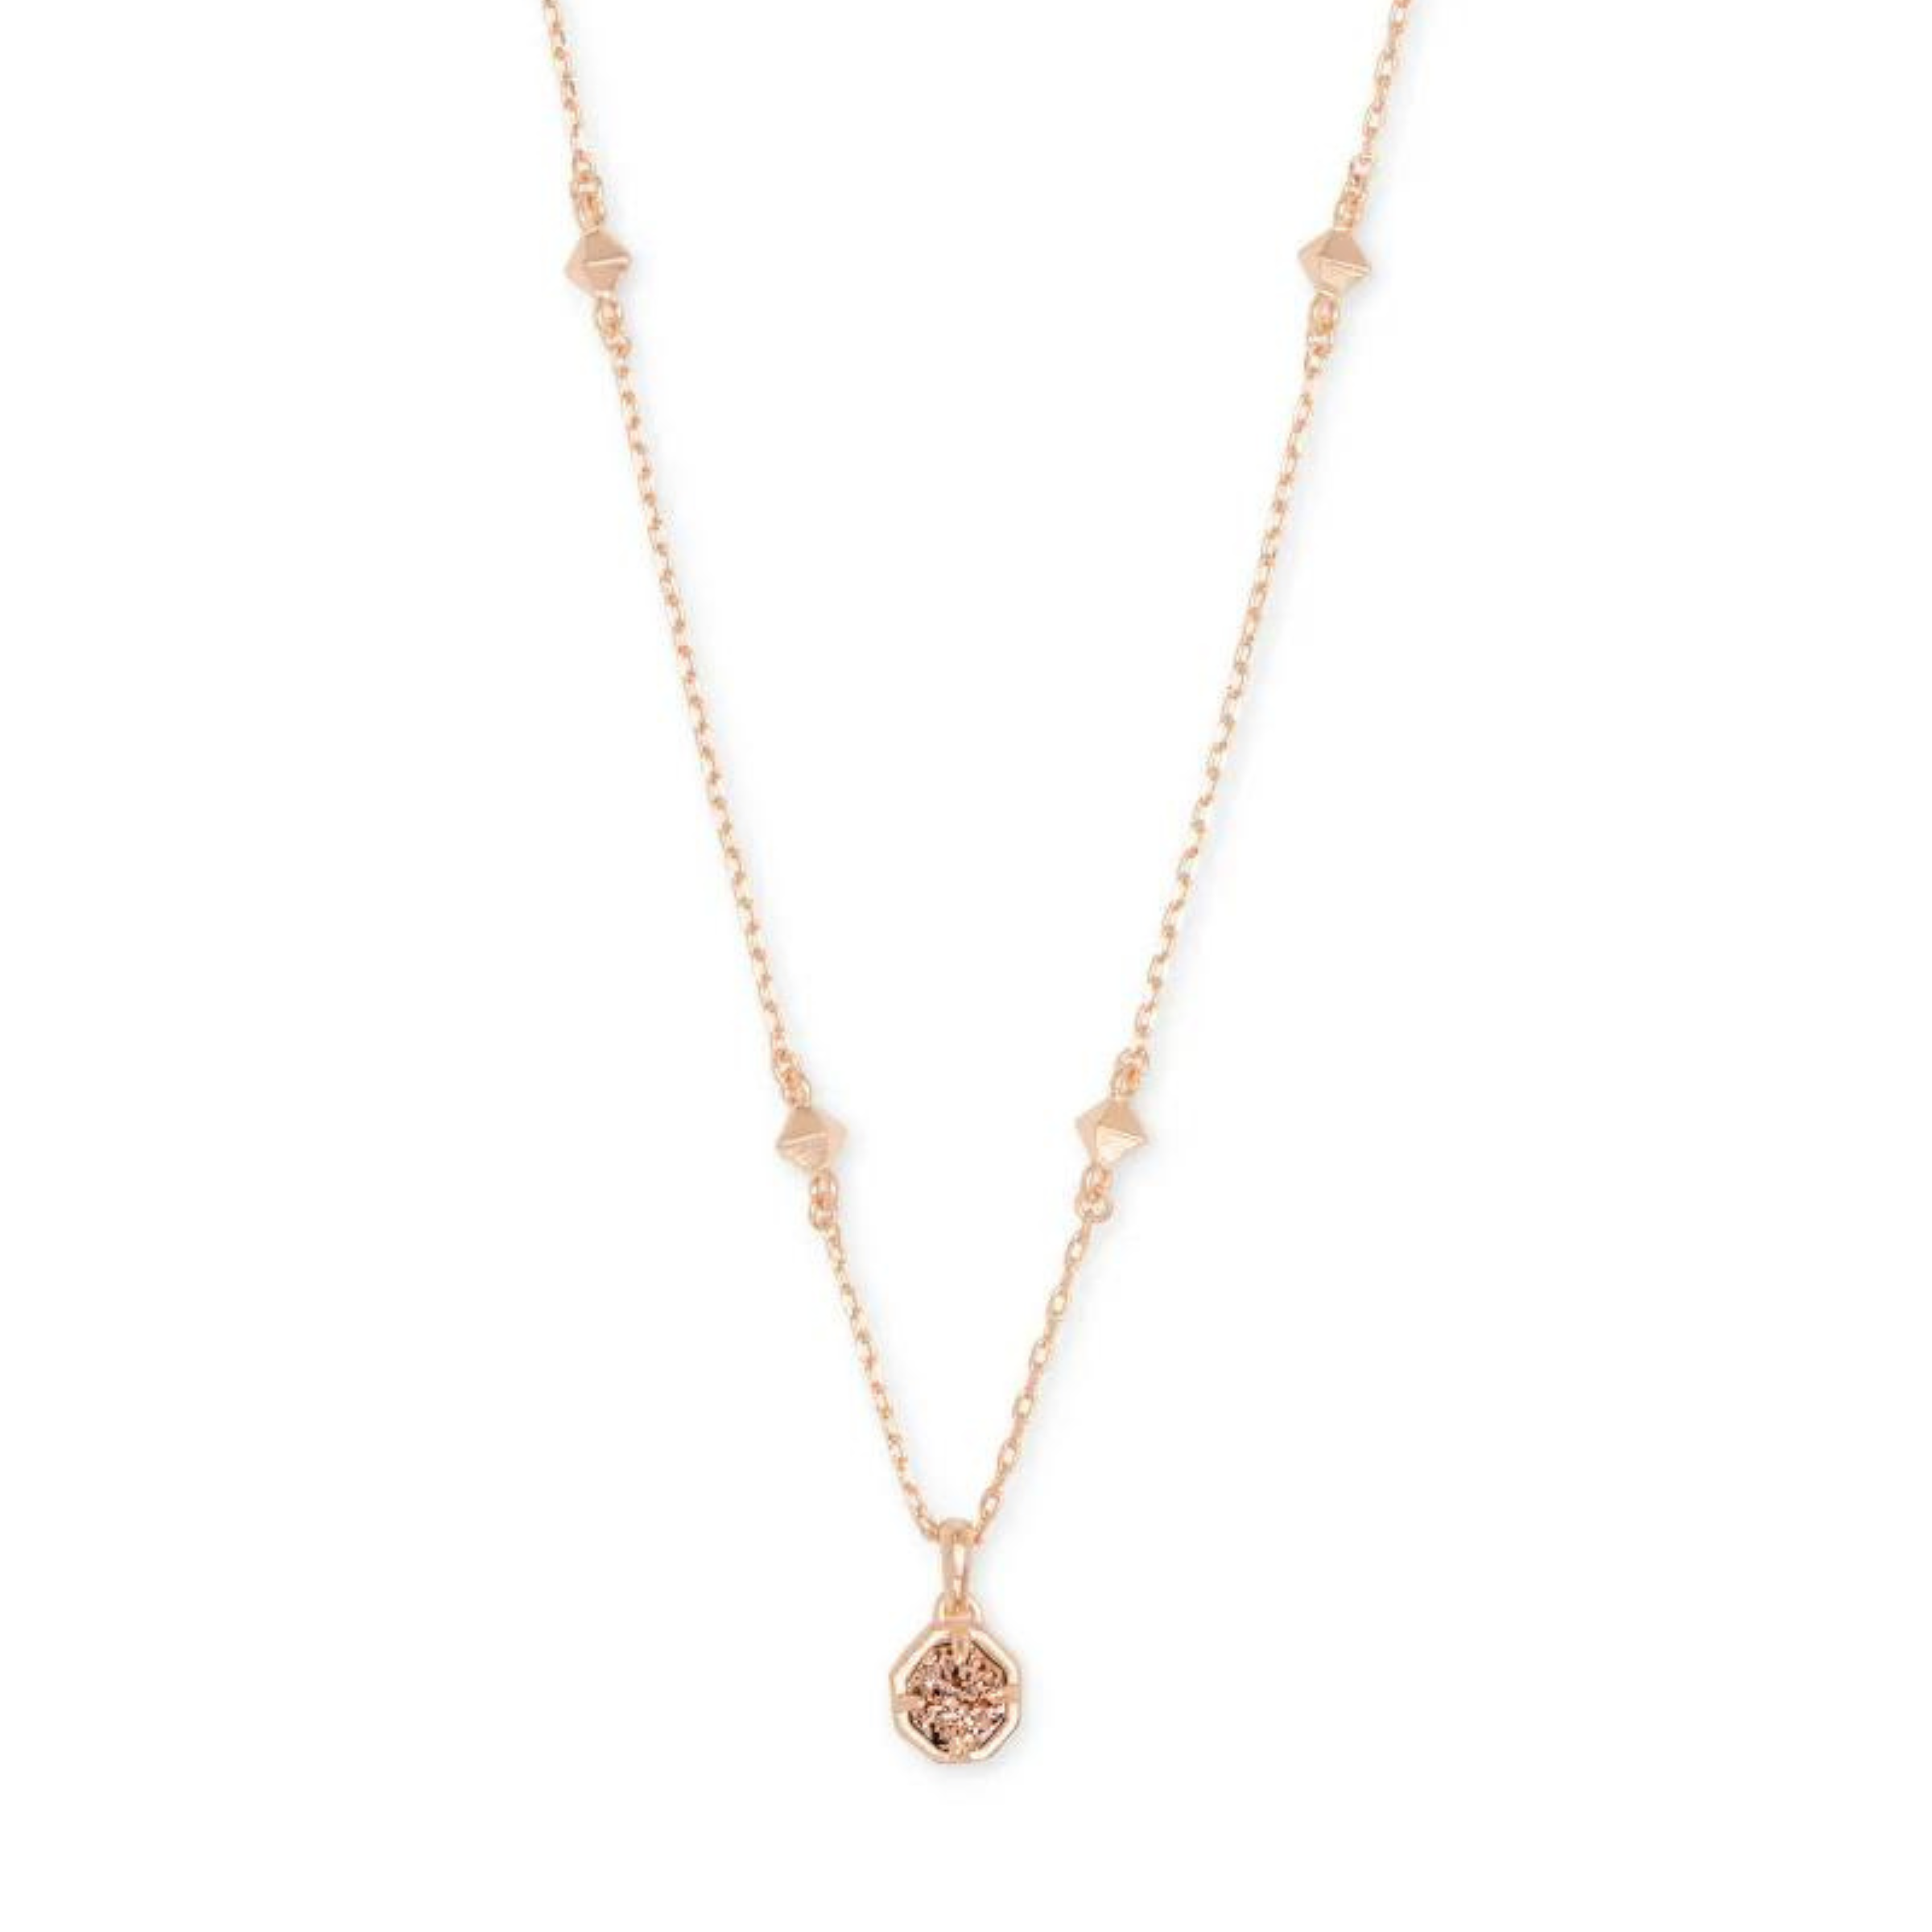 Rose gold necklace with rose gold drusy pendant, pictured on a white background.